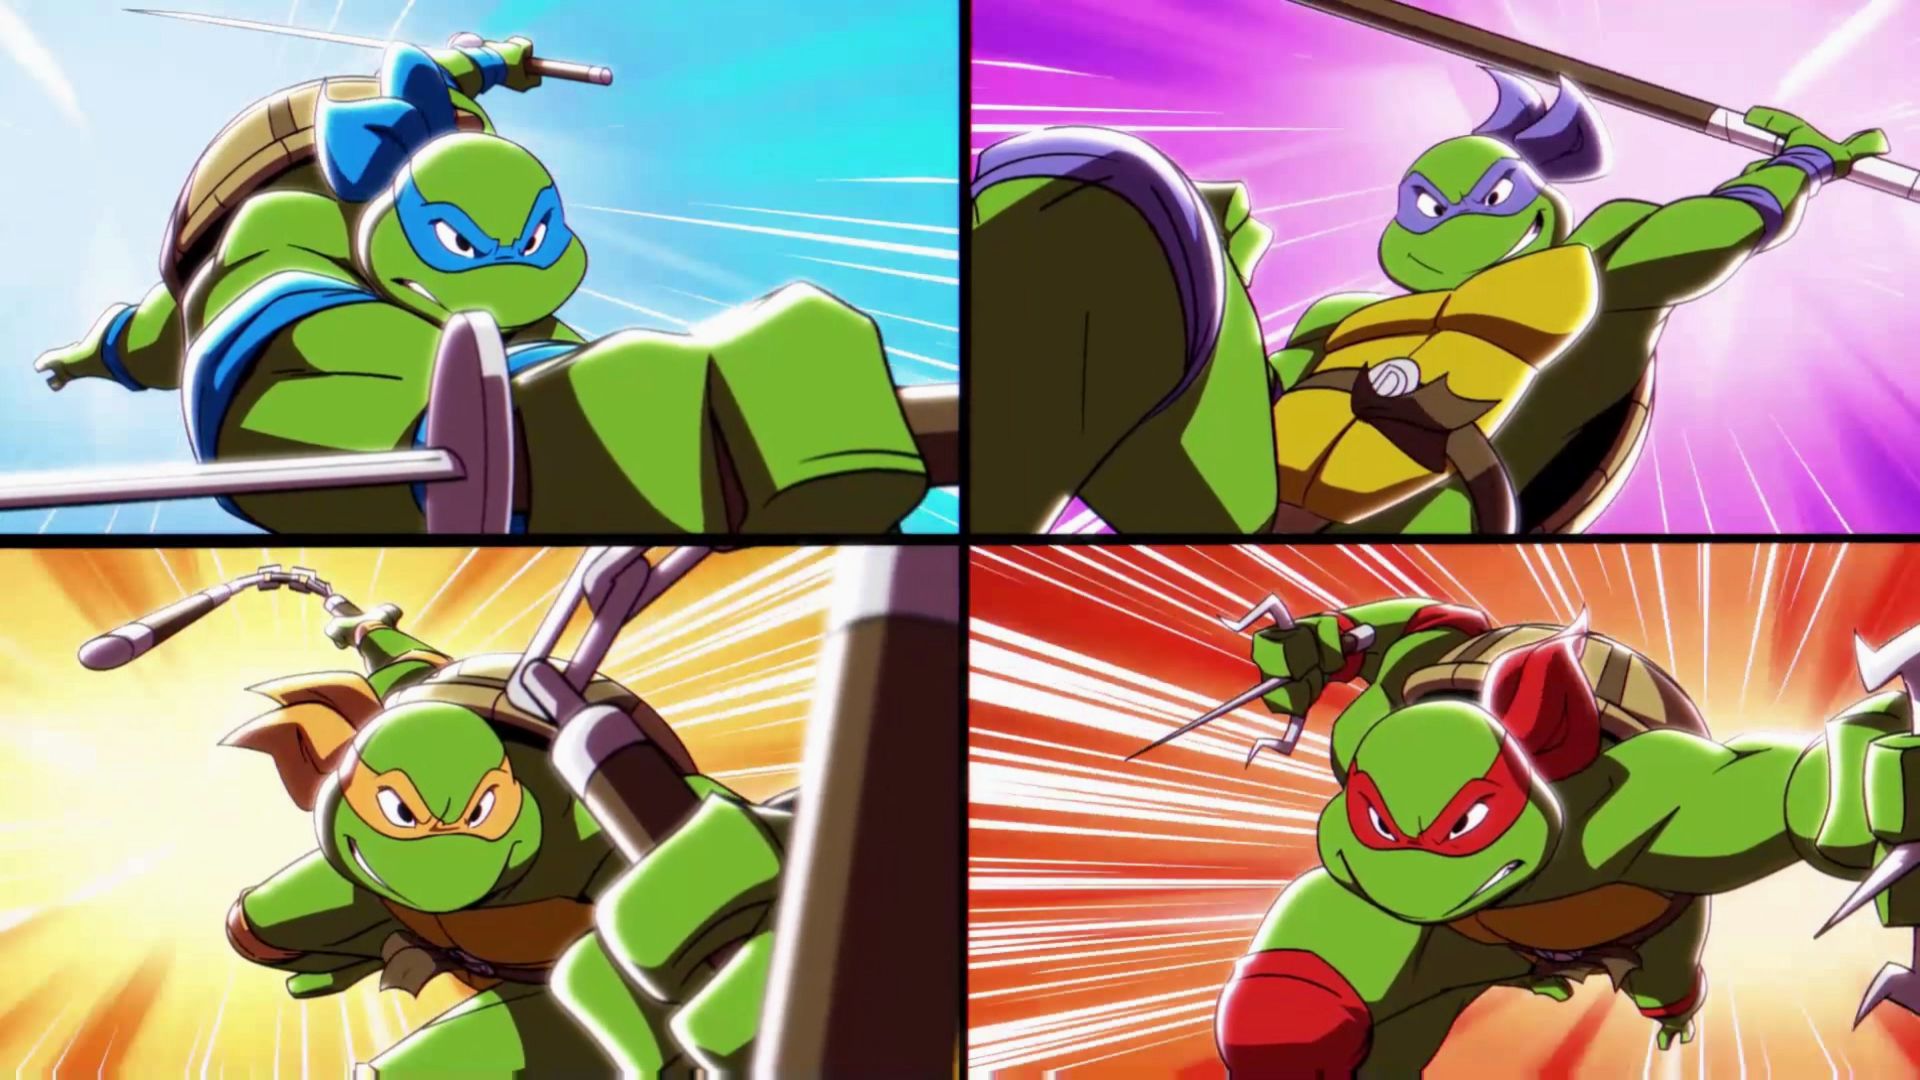 http://www.co-optimus.com/images/upload/image/TMNT-The-Cowabunga-Collection-intro-screenshot.jpg